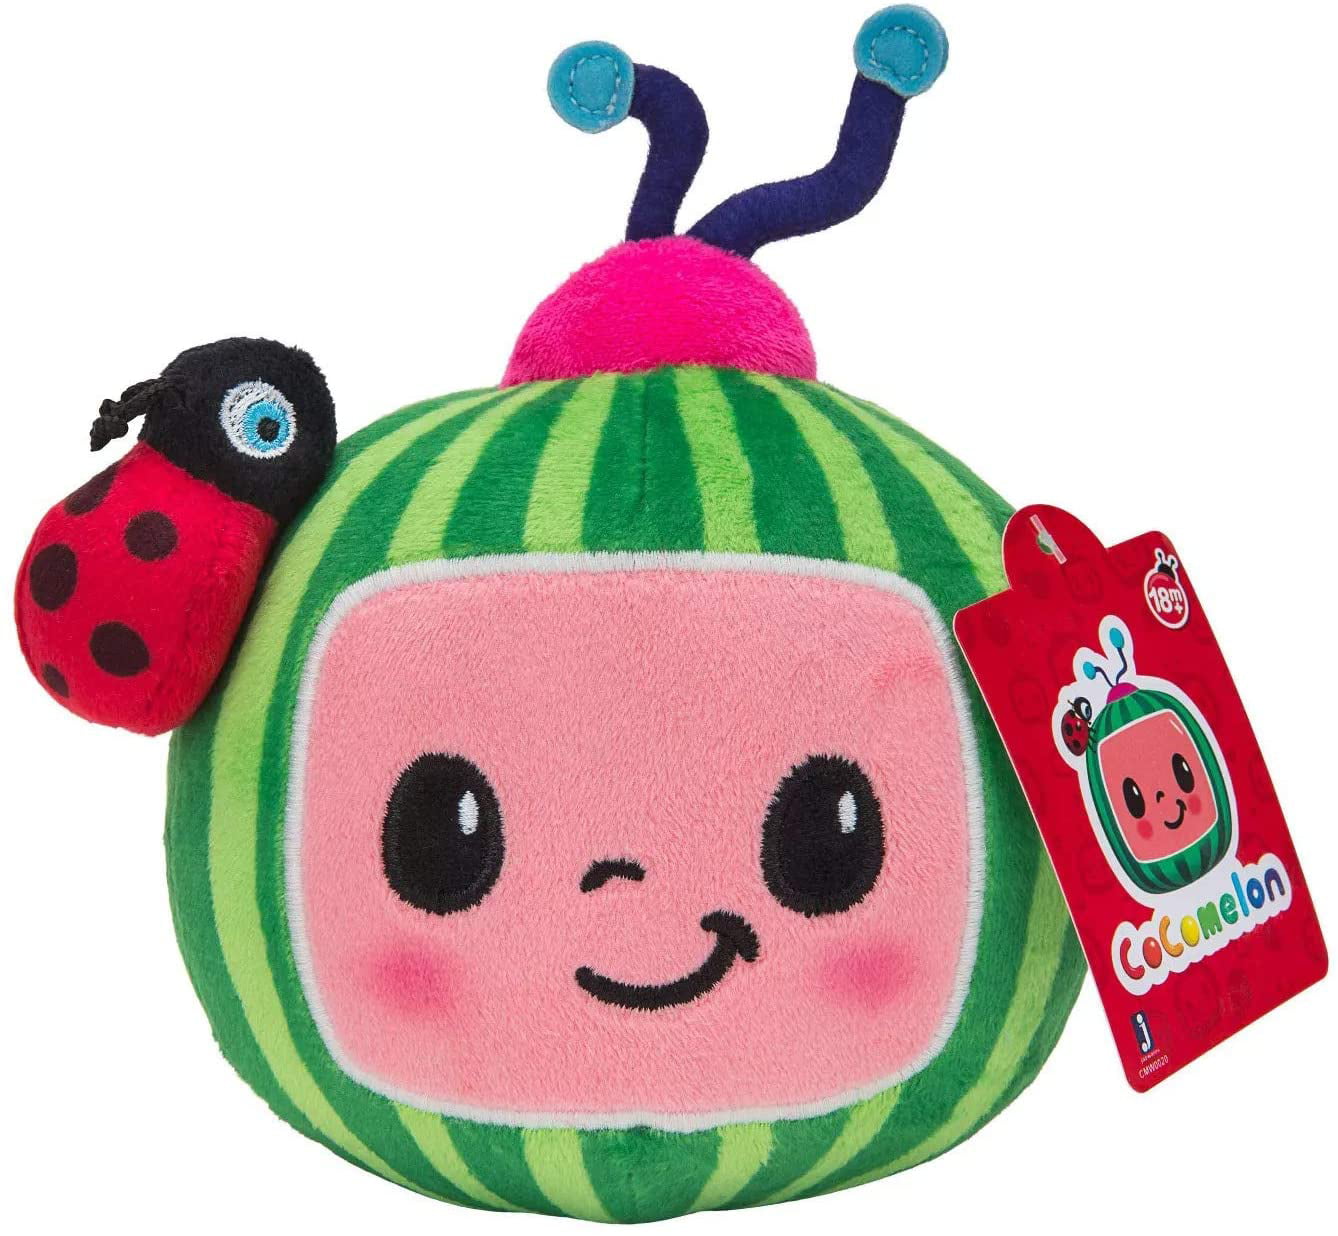 New Justice Pet Shop Watermelon Scented Bed Summer Accessory 8" Diameter Plush 